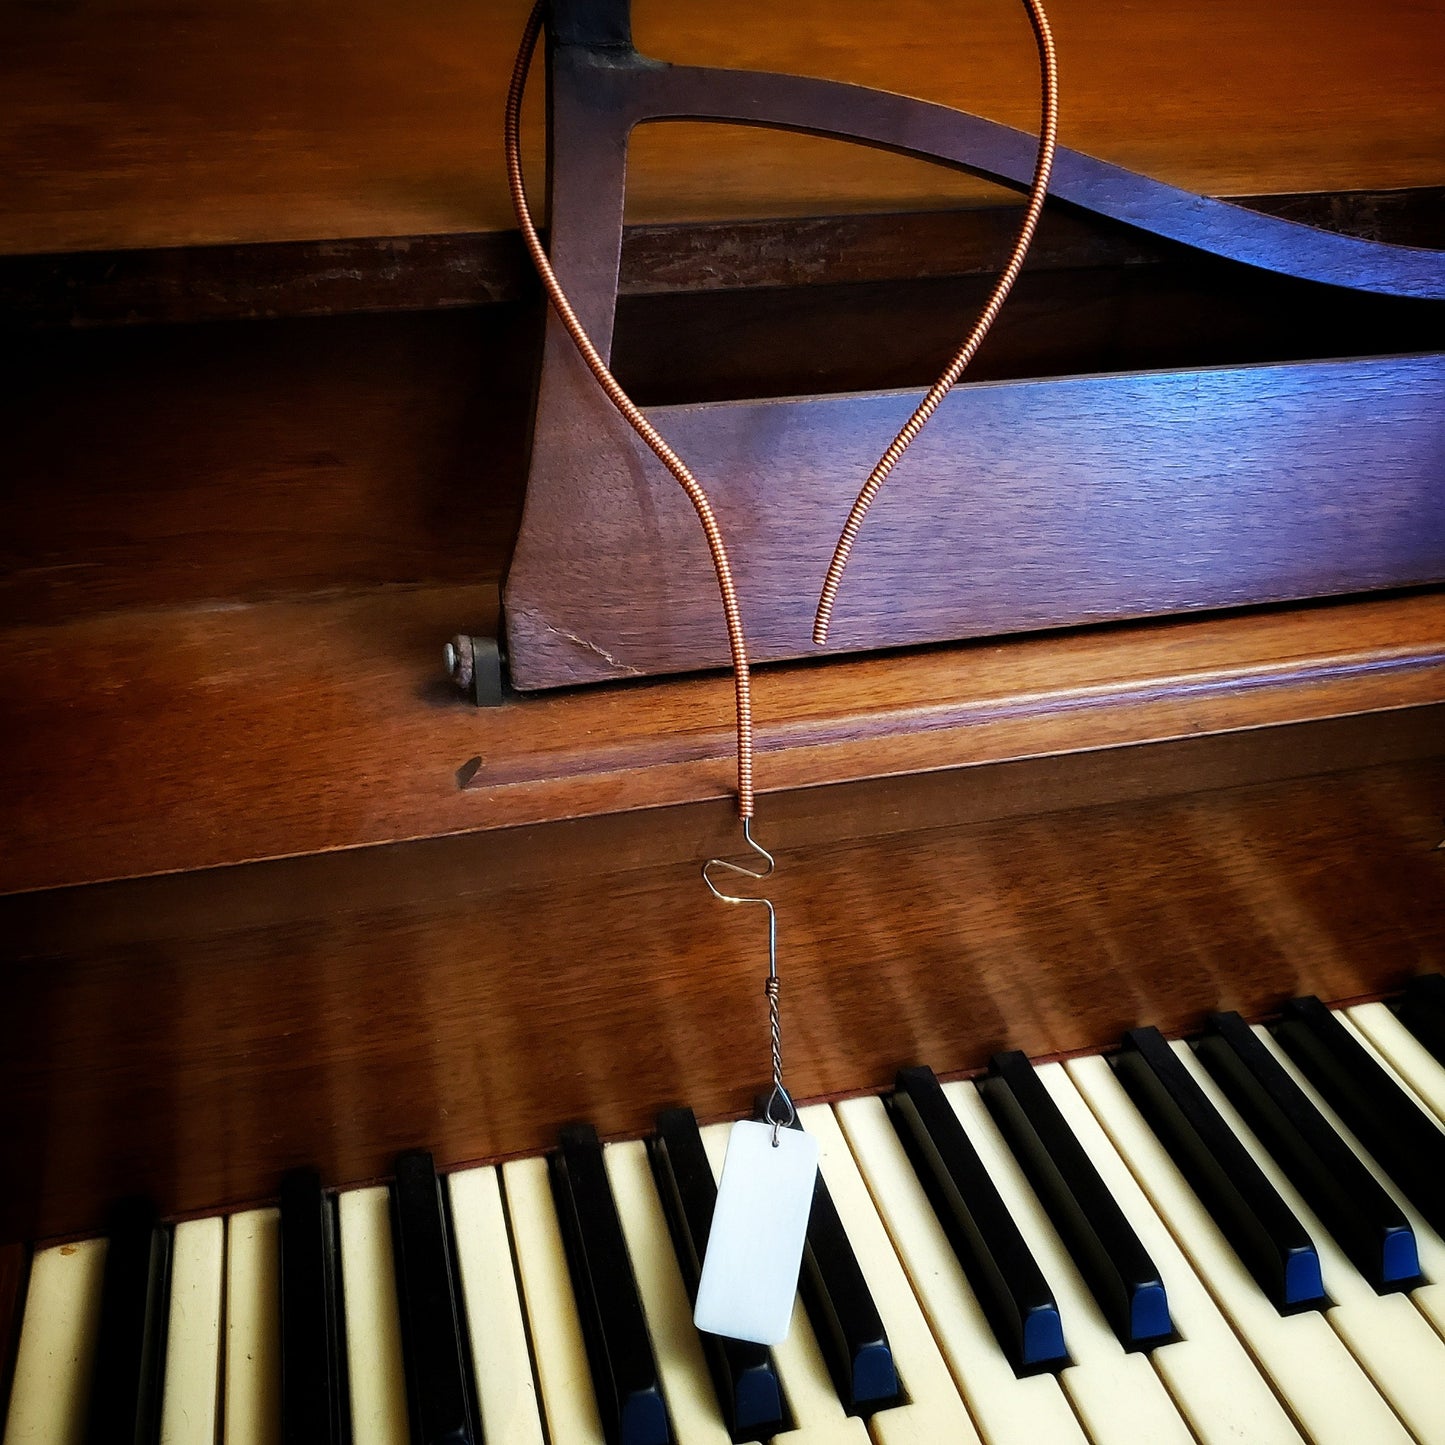 necklace made from an upcycled piano string and an ivory piano key topper - the necklace hangs on the sheet music holder of a piano